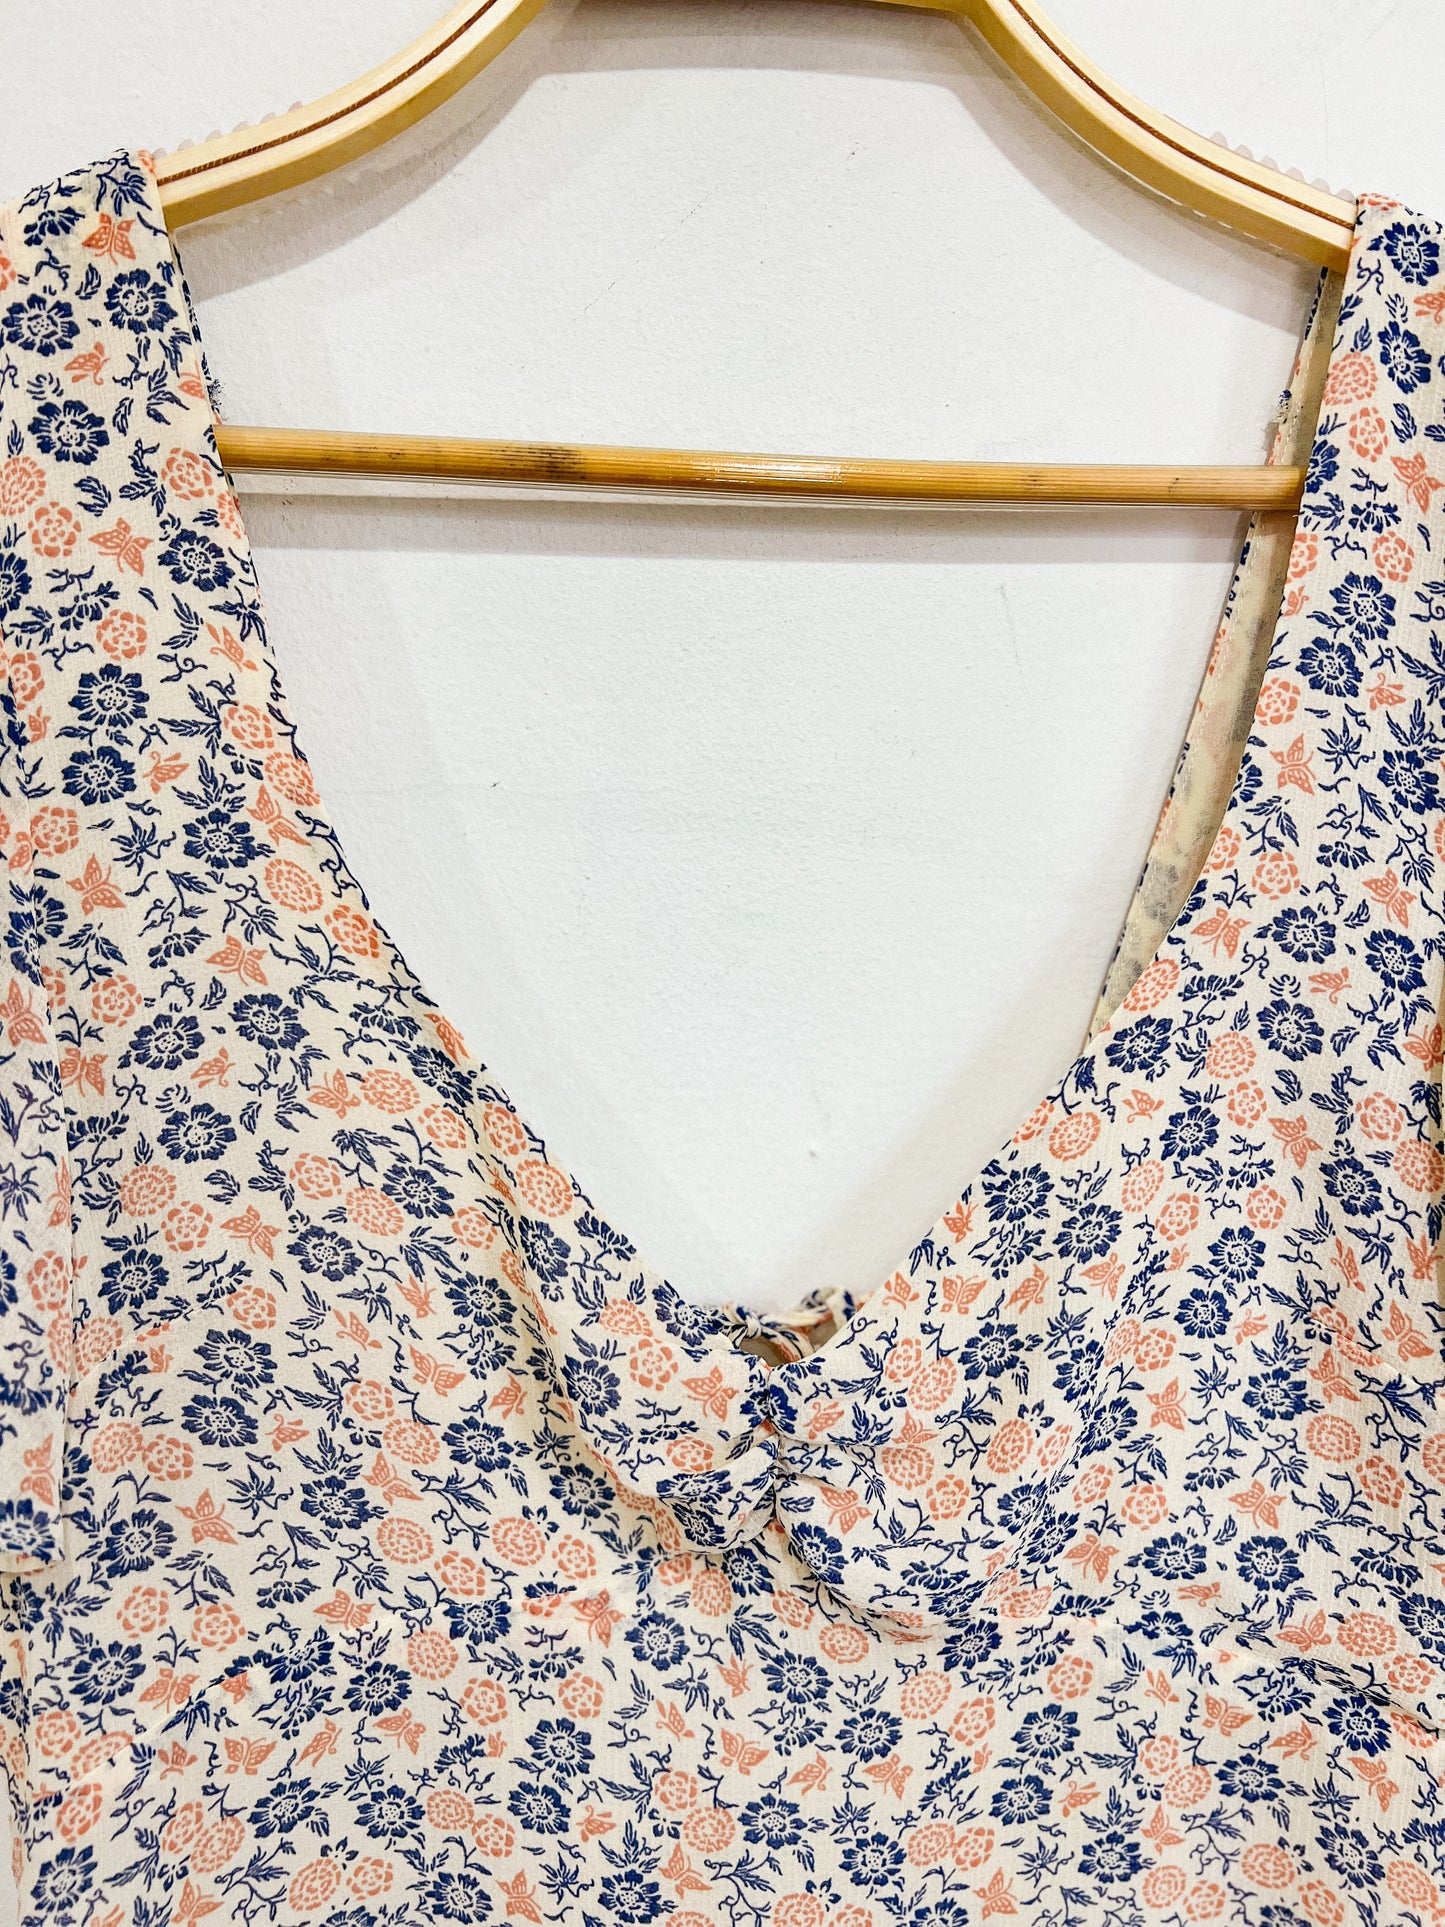 Urban Outfitters Floral Summer Dress (Size L)